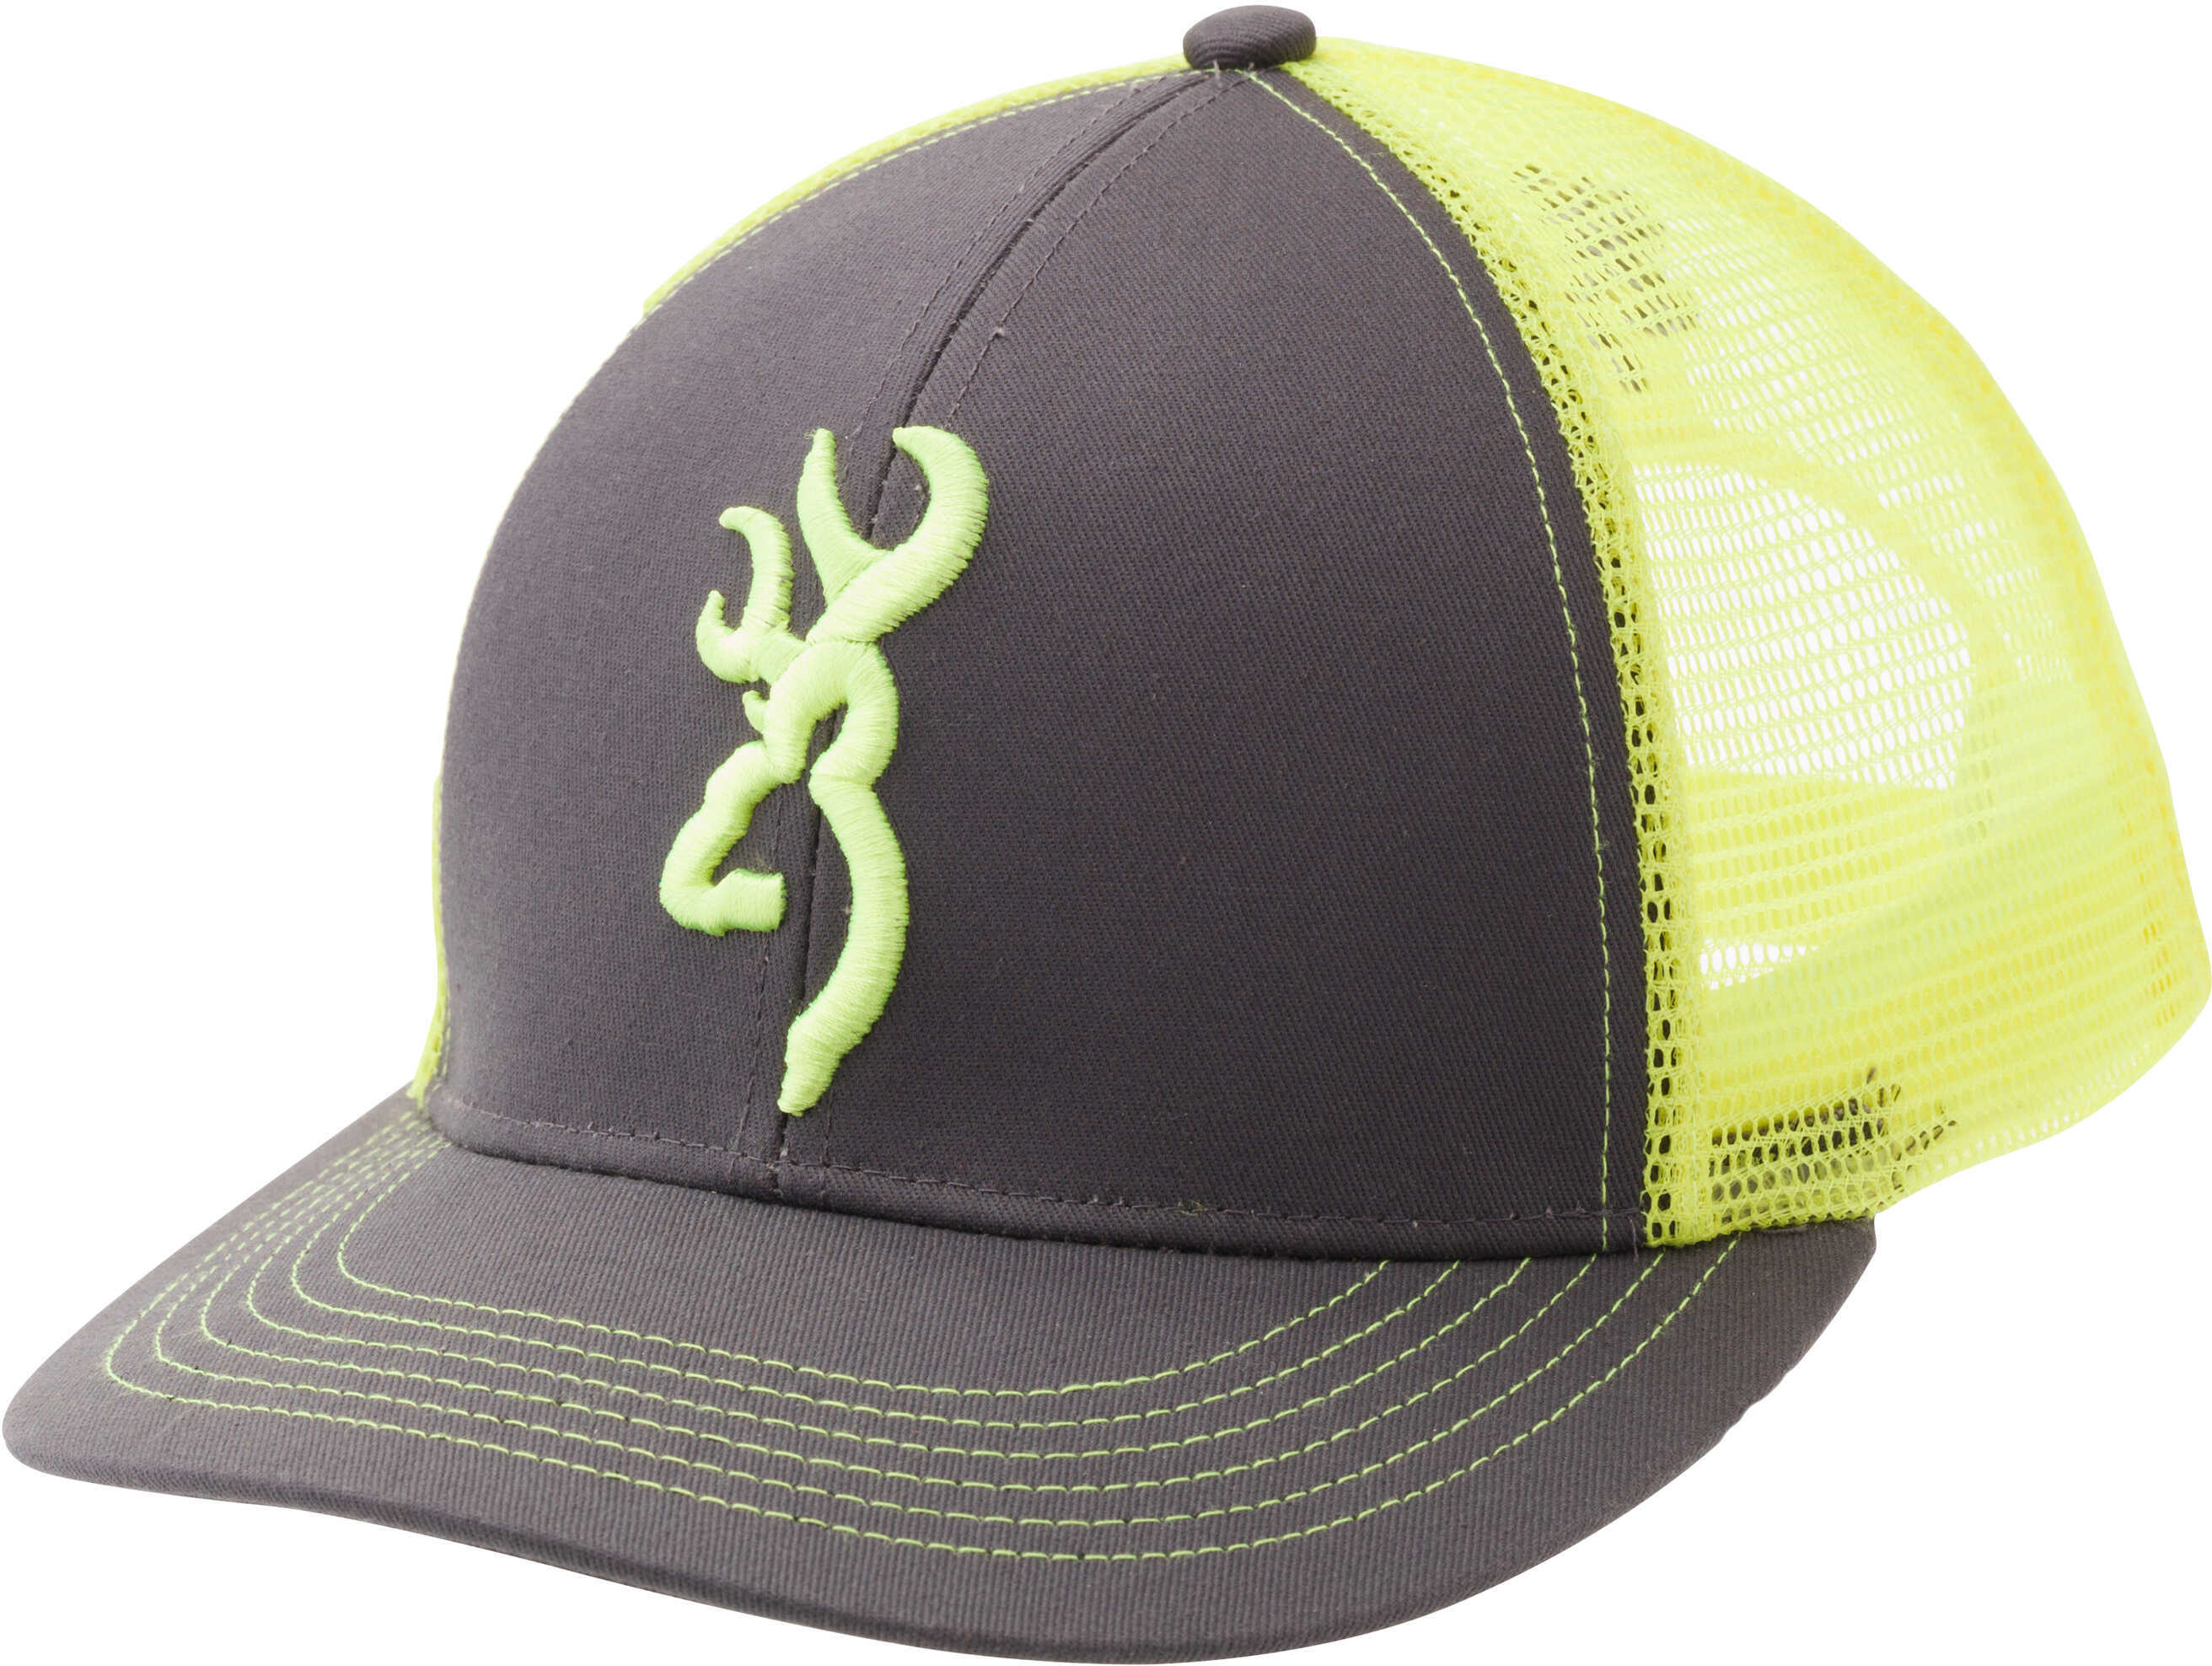 Browning Flashback Hat Charcoal/ Neon Green Model: 308177541-img-1